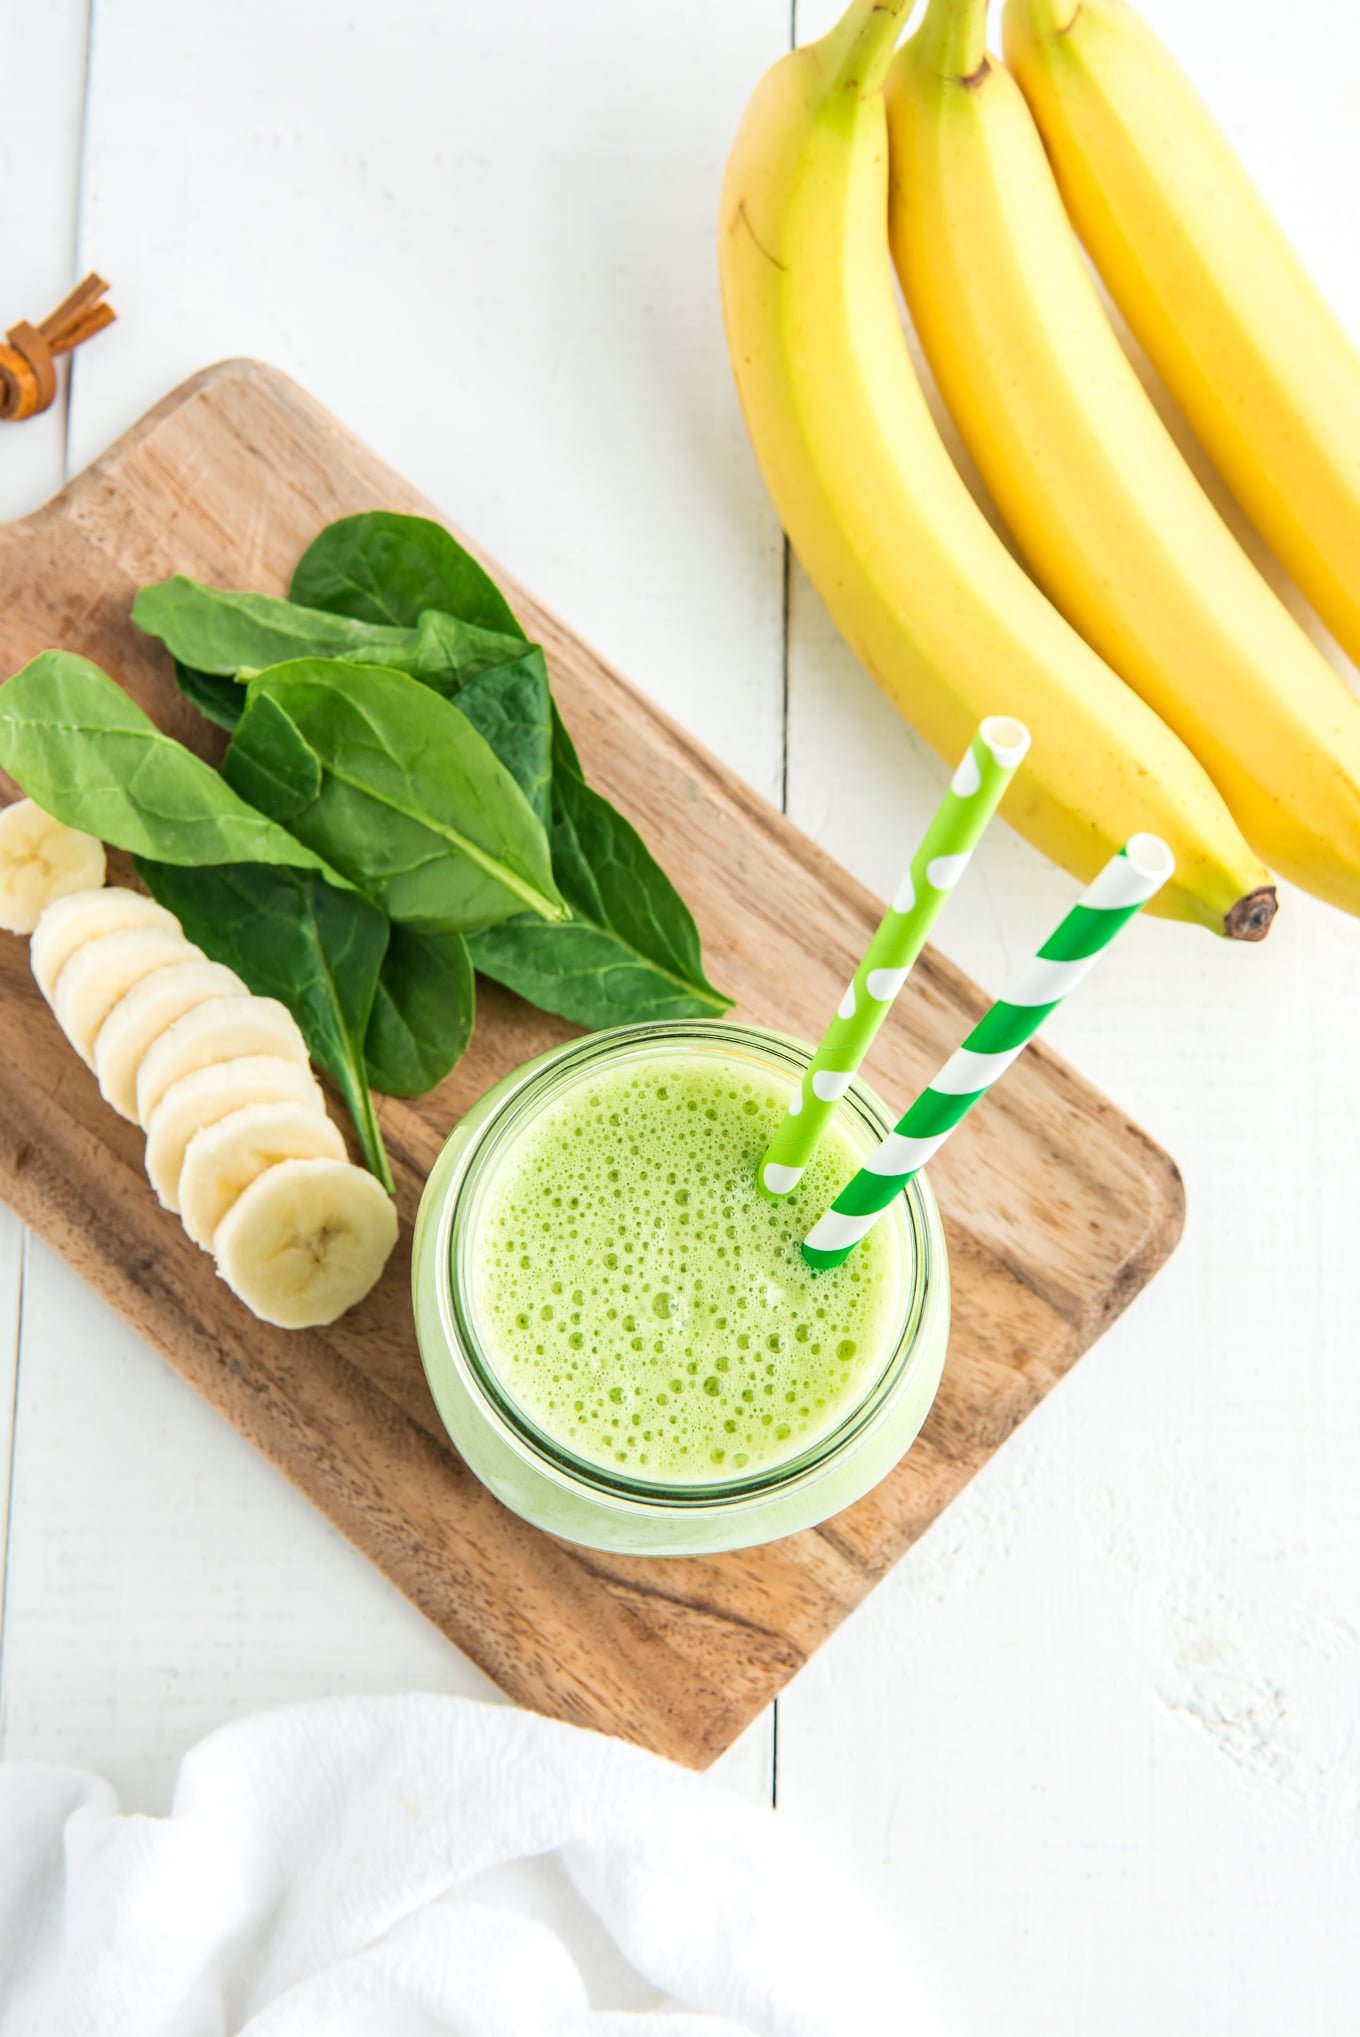 Spinach smoothie in a glass with two straws and some sliced bananas and fresh spinach leaves on the table next to the glass.